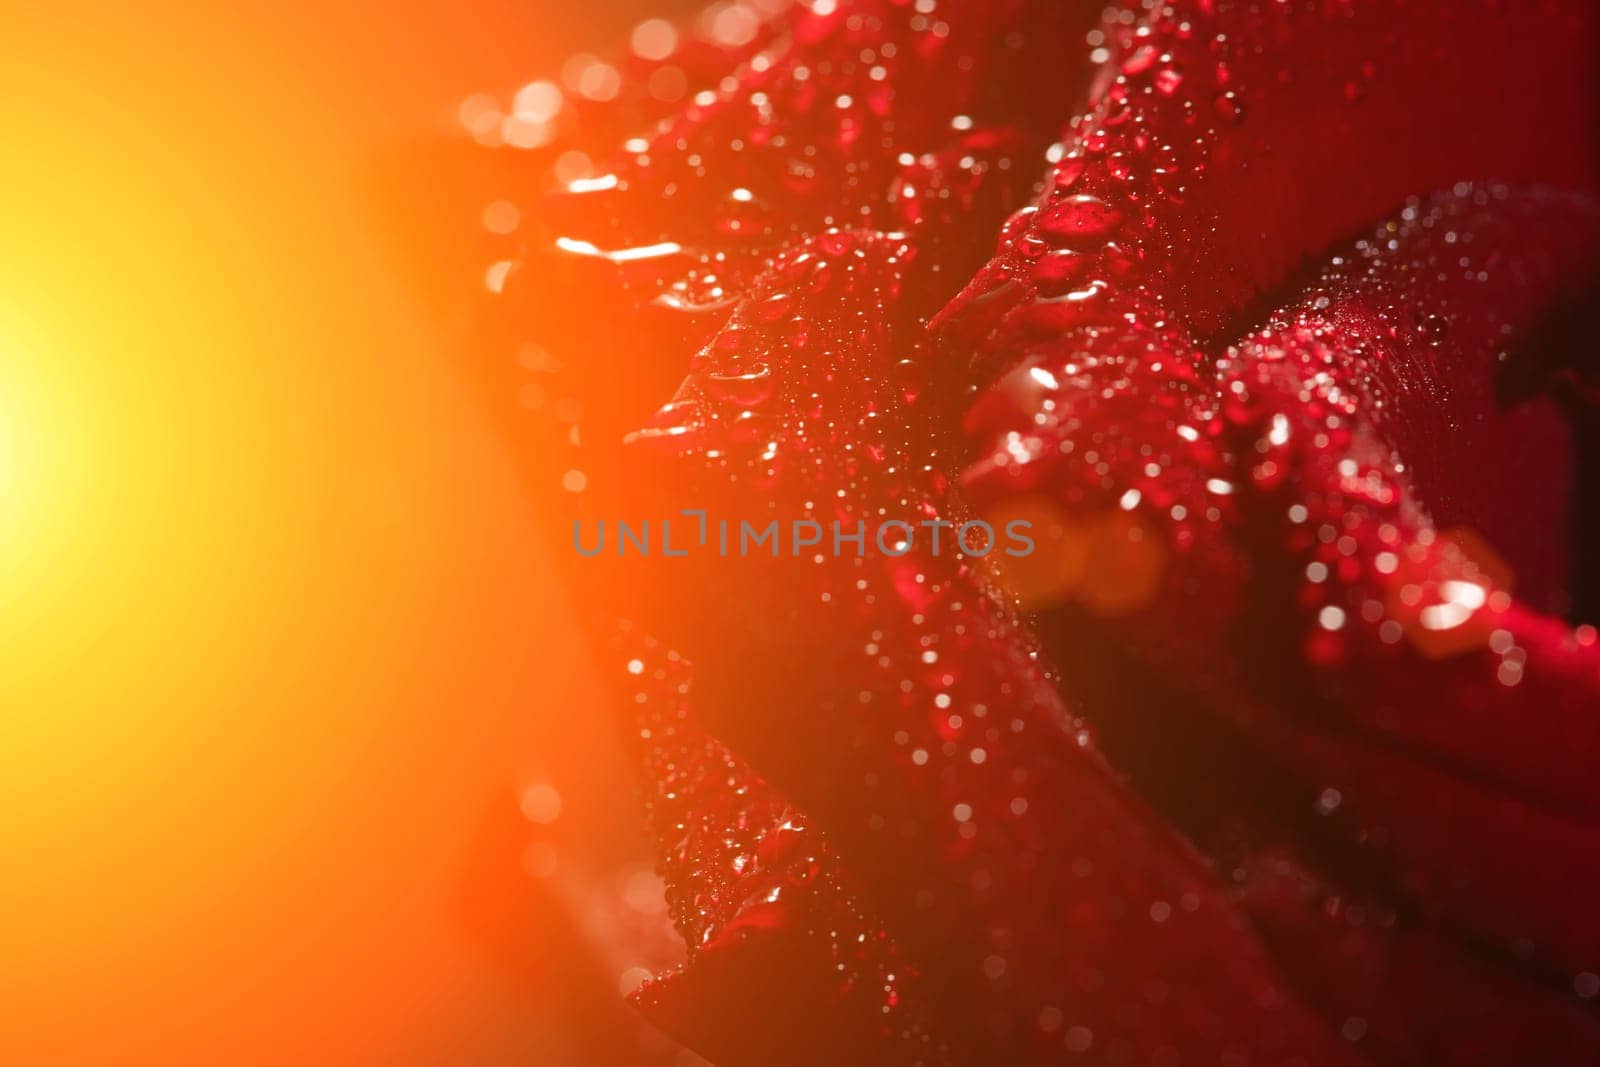 dark red rose with dew drops very close-up by glavbooh